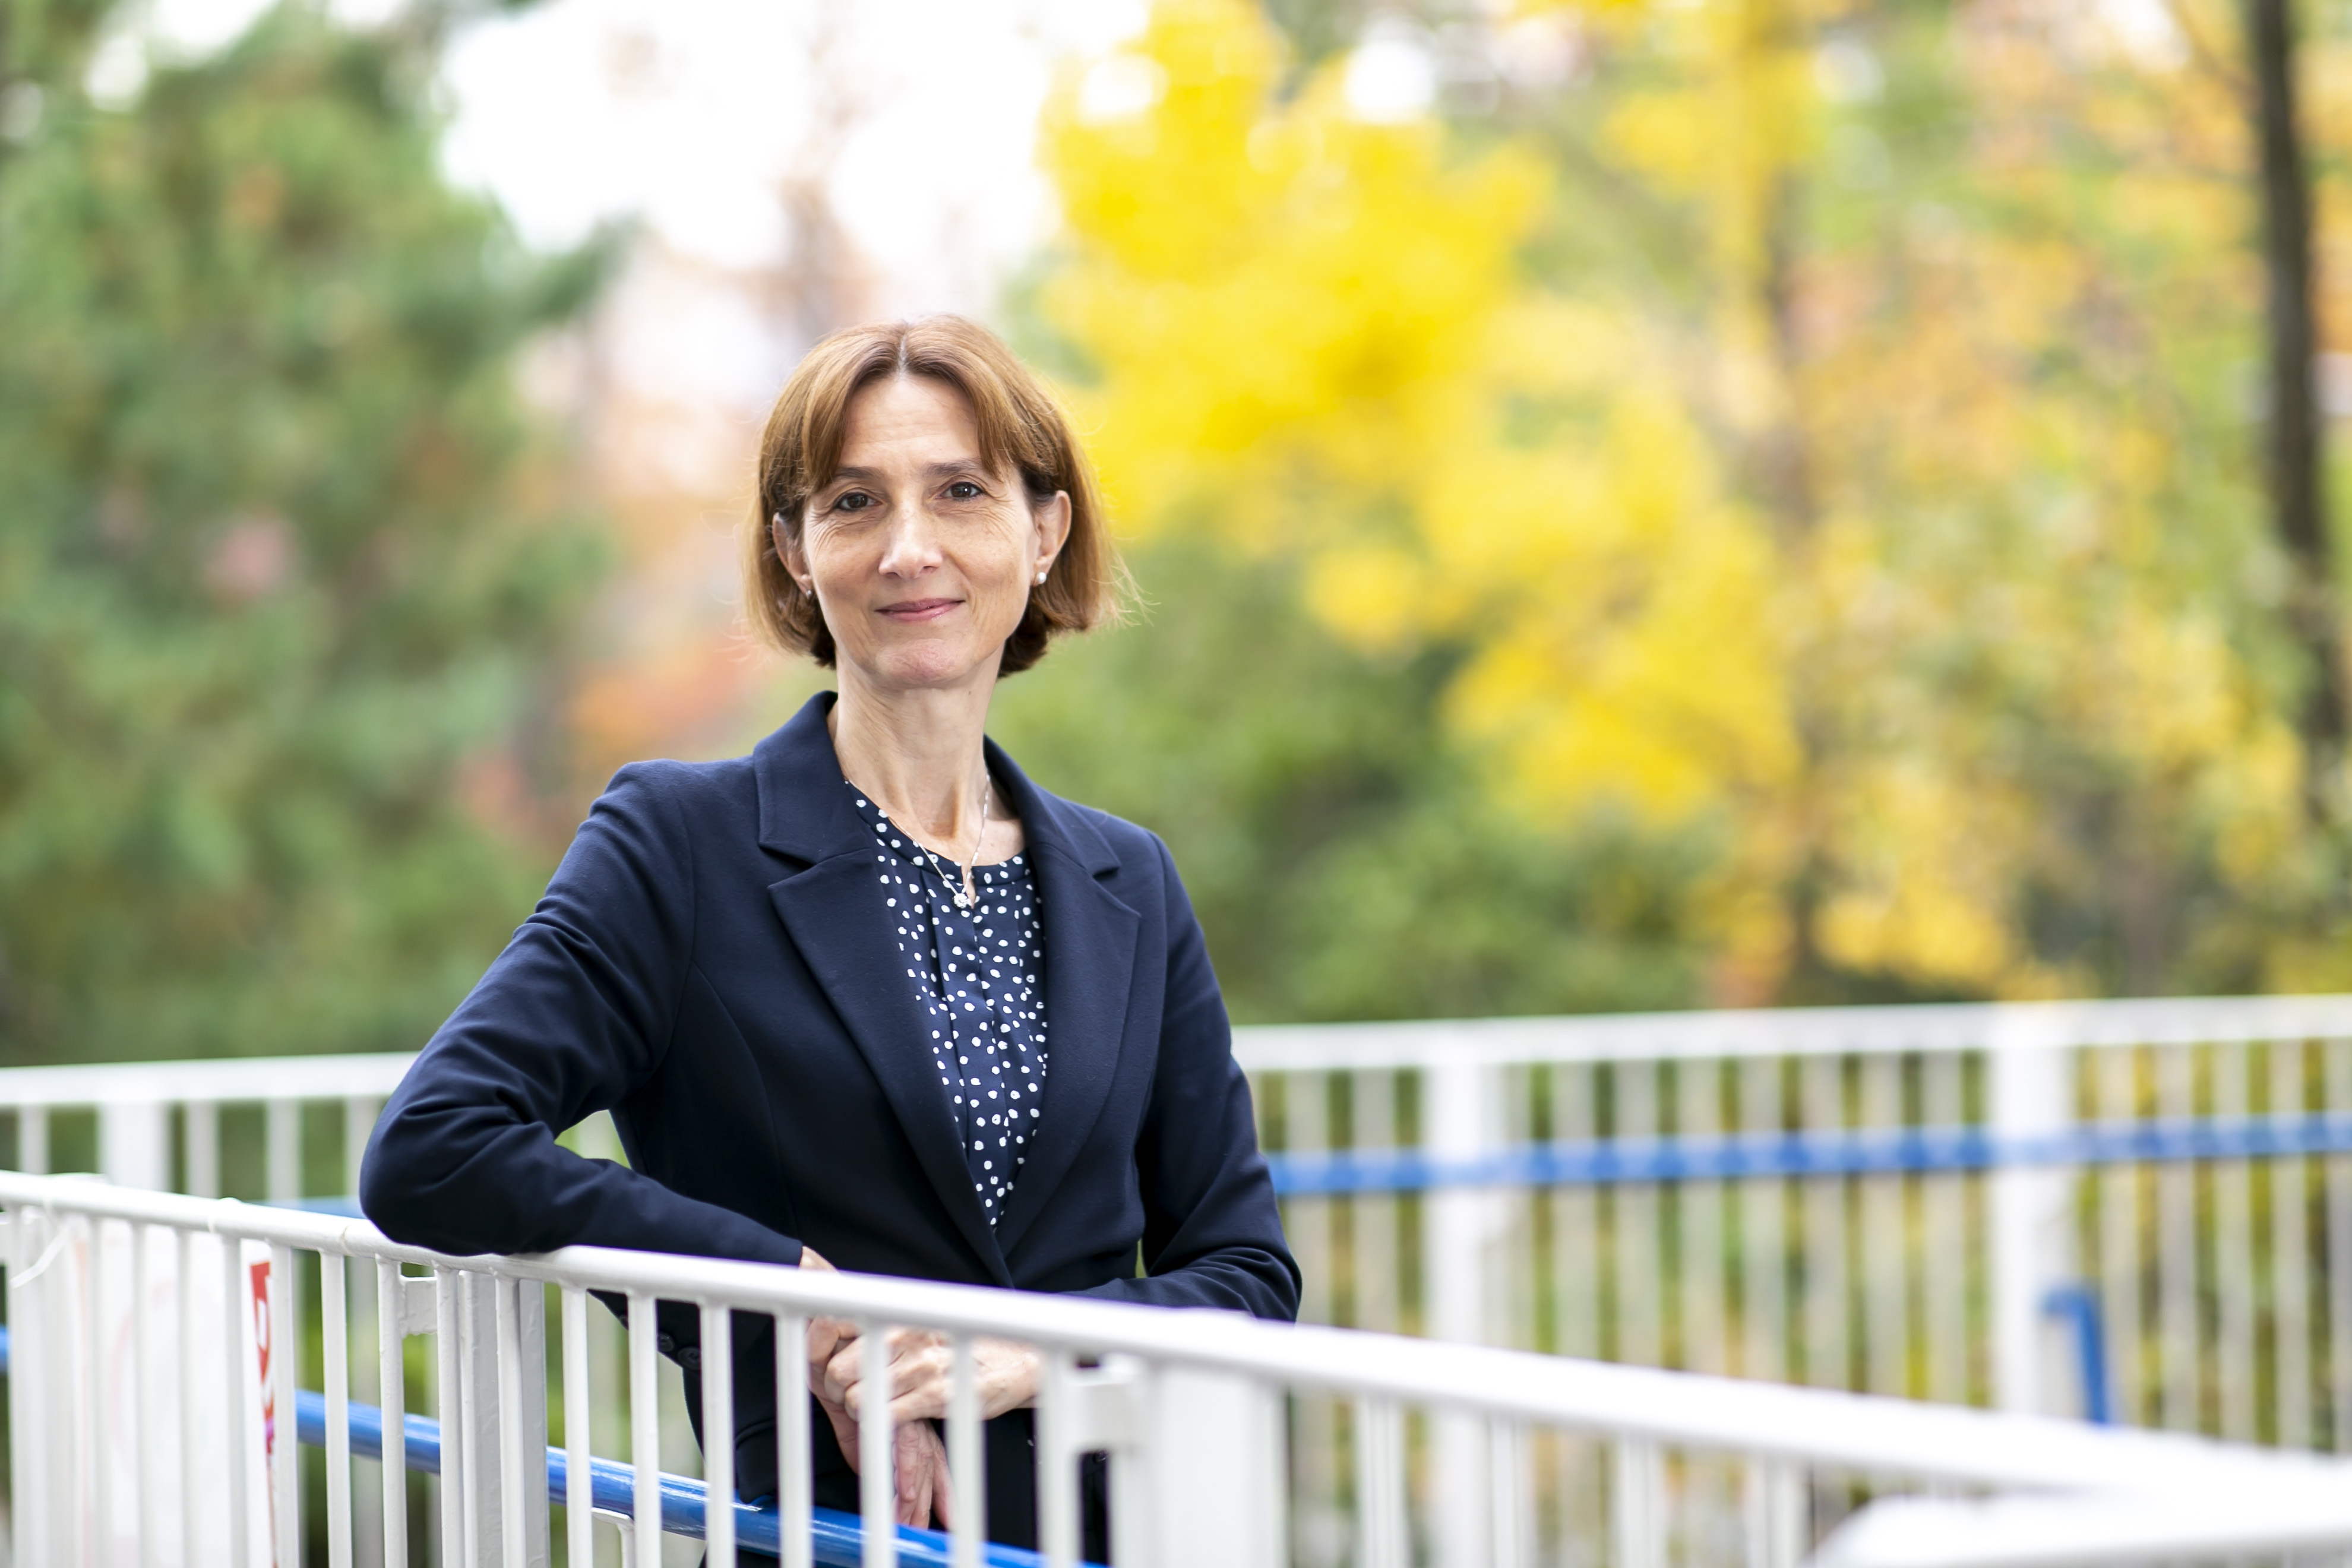 Dr. Paola Cavaliere, Specially Appointed Associate Professor, School of Human Sciences